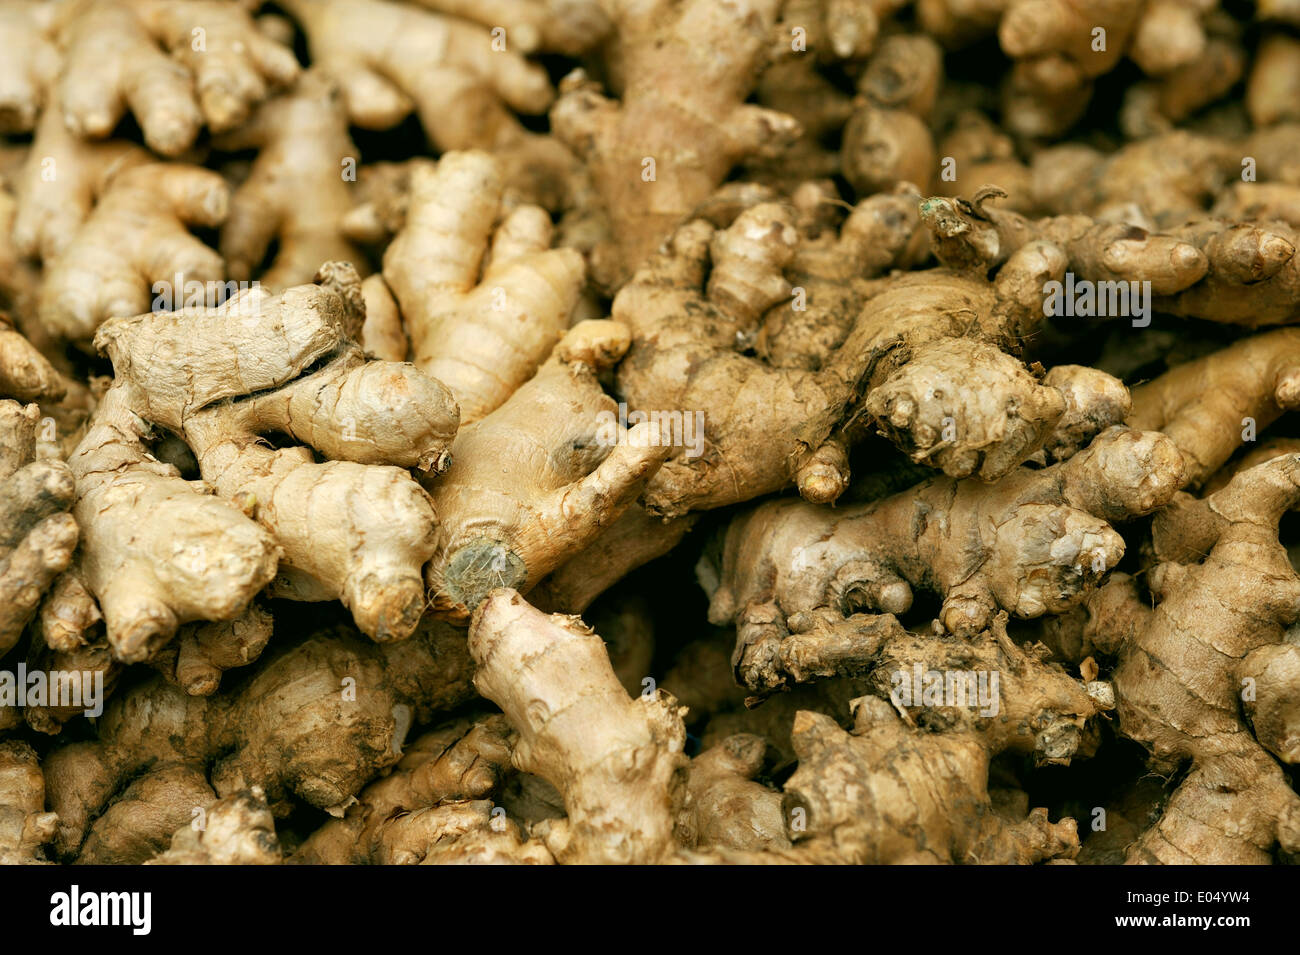 FRESH GINGER ROOT FOR SALE IN A MARKET Stock Photo